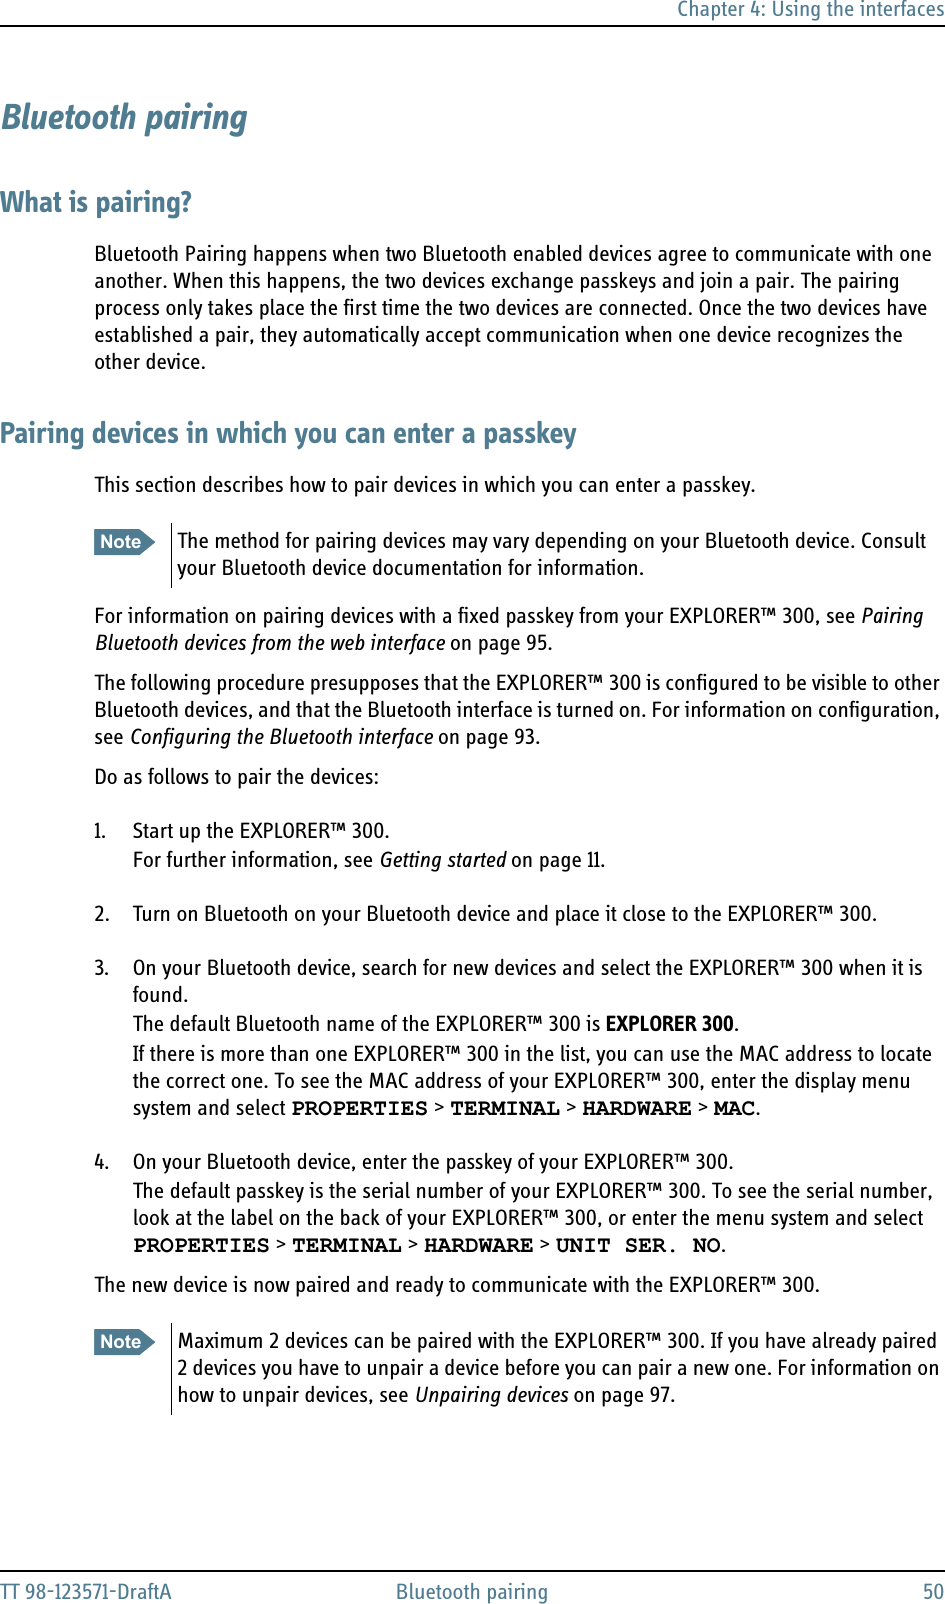 Chapter 4: Using the interfacesTT 98-123571-DraftA Bluetooth pairing 50Bluetooth pairingWhat is pairing?Bluetooth Pairing happens when two Bluetooth enabled devices agree to communicate with one another. When this happens, the two devices exchange passkeys and join a pair. The pairing process only takes place the first time the two devices are connected. Once the two devices have established a pair, they automatically accept communication when one device recognizes the other device.Pairing devices in which you can enter a passkeyThis section describes how to pair devices in which you can enter a passkey. For information on pairing devices with a fixed passkey from your EXPLORER™ 300, see Pairing Bluetooth devices from the web interface on page 95.The following procedure presupposes that the EXPLORER™ 300 is configured to be visible to other Bluetooth devices, and that the Bluetooth interface is turned on. For information on configuration, see Configuring the Bluetooth interface on page 93.Do as follows to pair the devices:1. Start up the EXPLORER™ 300.For further information, see Getting started on page 11.2. Turn on Bluetooth on your Bluetooth device and place it close to the EXPLORER™ 300.3. On your Bluetooth device, search for new devices and select the EXPLORER™ 300 when it is found. The default Bluetooth name of the EXPLORER™ 300 is EXPLORER 300.If there is more than one EXPLORER™ 300 in the list, you can use the MAC address to locate the correct one. To see the MAC address of your EXPLORER™ 300, enter the display menu system and select PROPERTIES &gt; TERMINAL &gt; HARDWARE &gt; MAC.4. On your Bluetooth device, enter the passkey of your EXPLORER™ 300. The default passkey is the serial number of your EXPLORER™ 300. To see the serial number, look at the label on the back of your EXPLORER™ 300, or enter the menu system and select PROPERTIES &gt; TERMINAL &gt; HARDWARE &gt; UNIT SER. NO.The new device is now paired and ready to communicate with the EXPLORER™ 300.Note The method for pairing devices may vary depending on your Bluetooth device. Consult your Bluetooth device documentation for information.Note Maximum 2 devices can be paired with the EXPLORER™ 300. If you have already paired 2 devices you have to unpair a device before you can pair a new one. For information on how to unpair devices, see Unpairing devices on page 97.